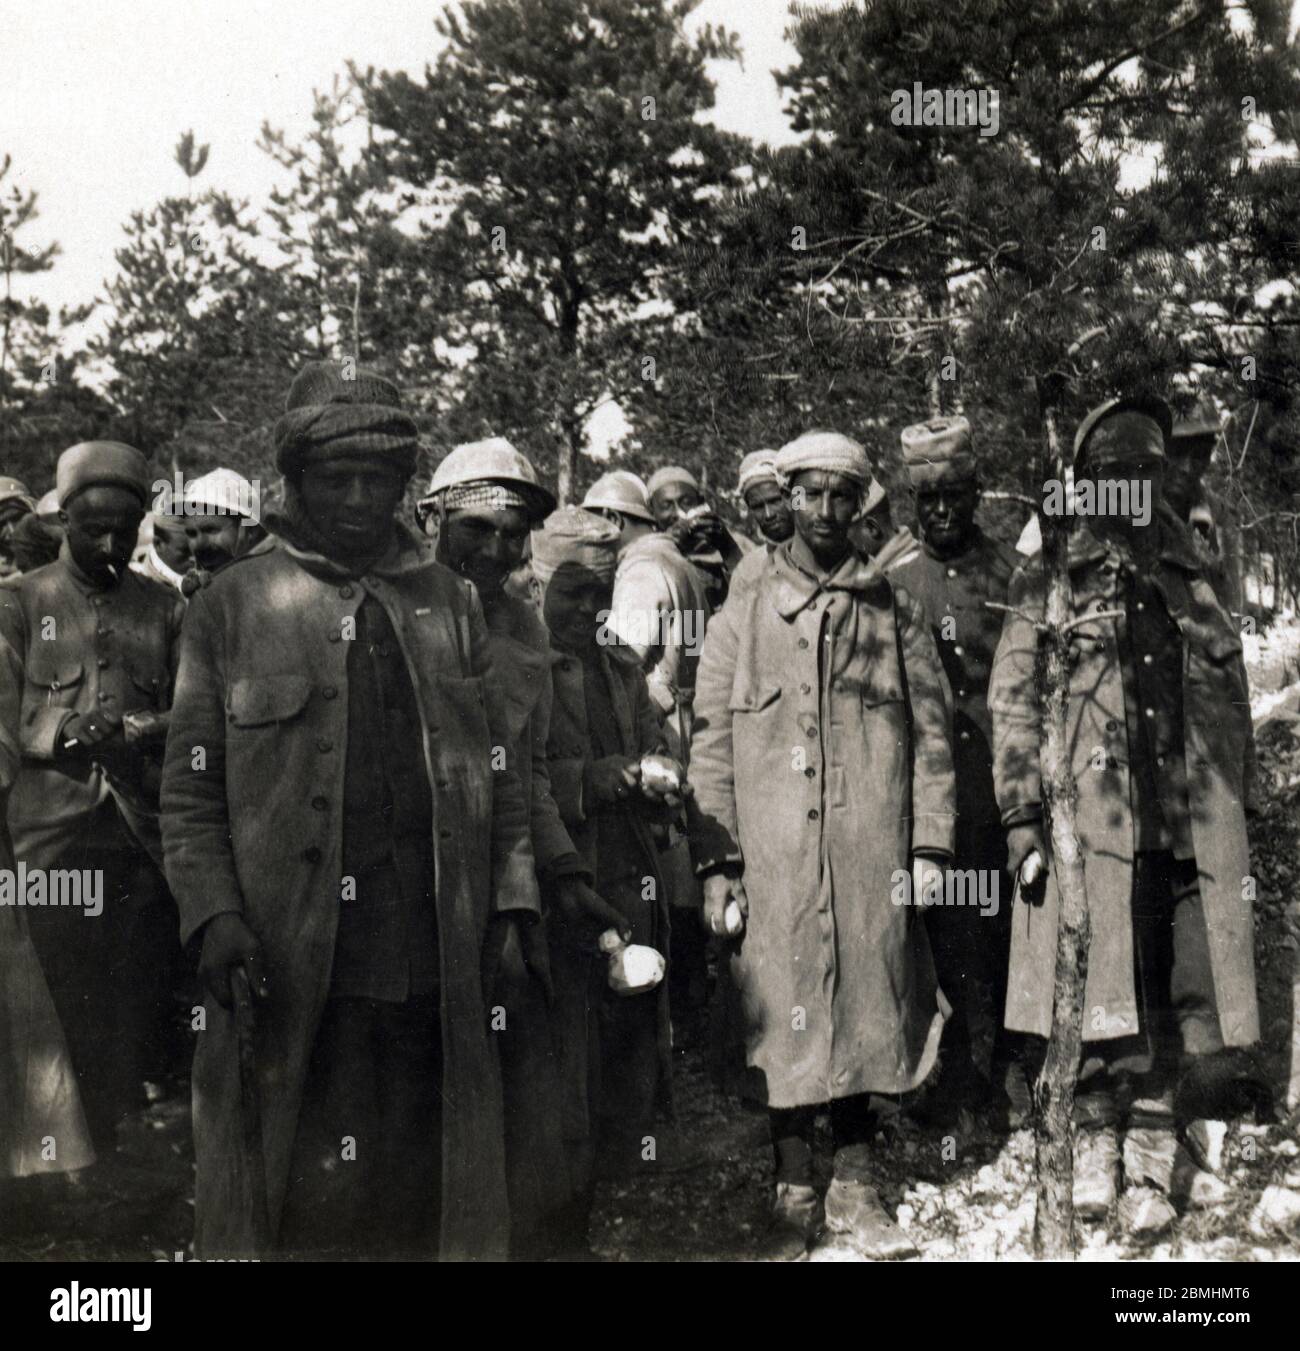 Premiere guerre mondiale : soldats des Troupes coloniales, vers 1914 - Photographie (WWI : Soldiers from the French Colonial Forces, 1914) Collezione Foto Stock